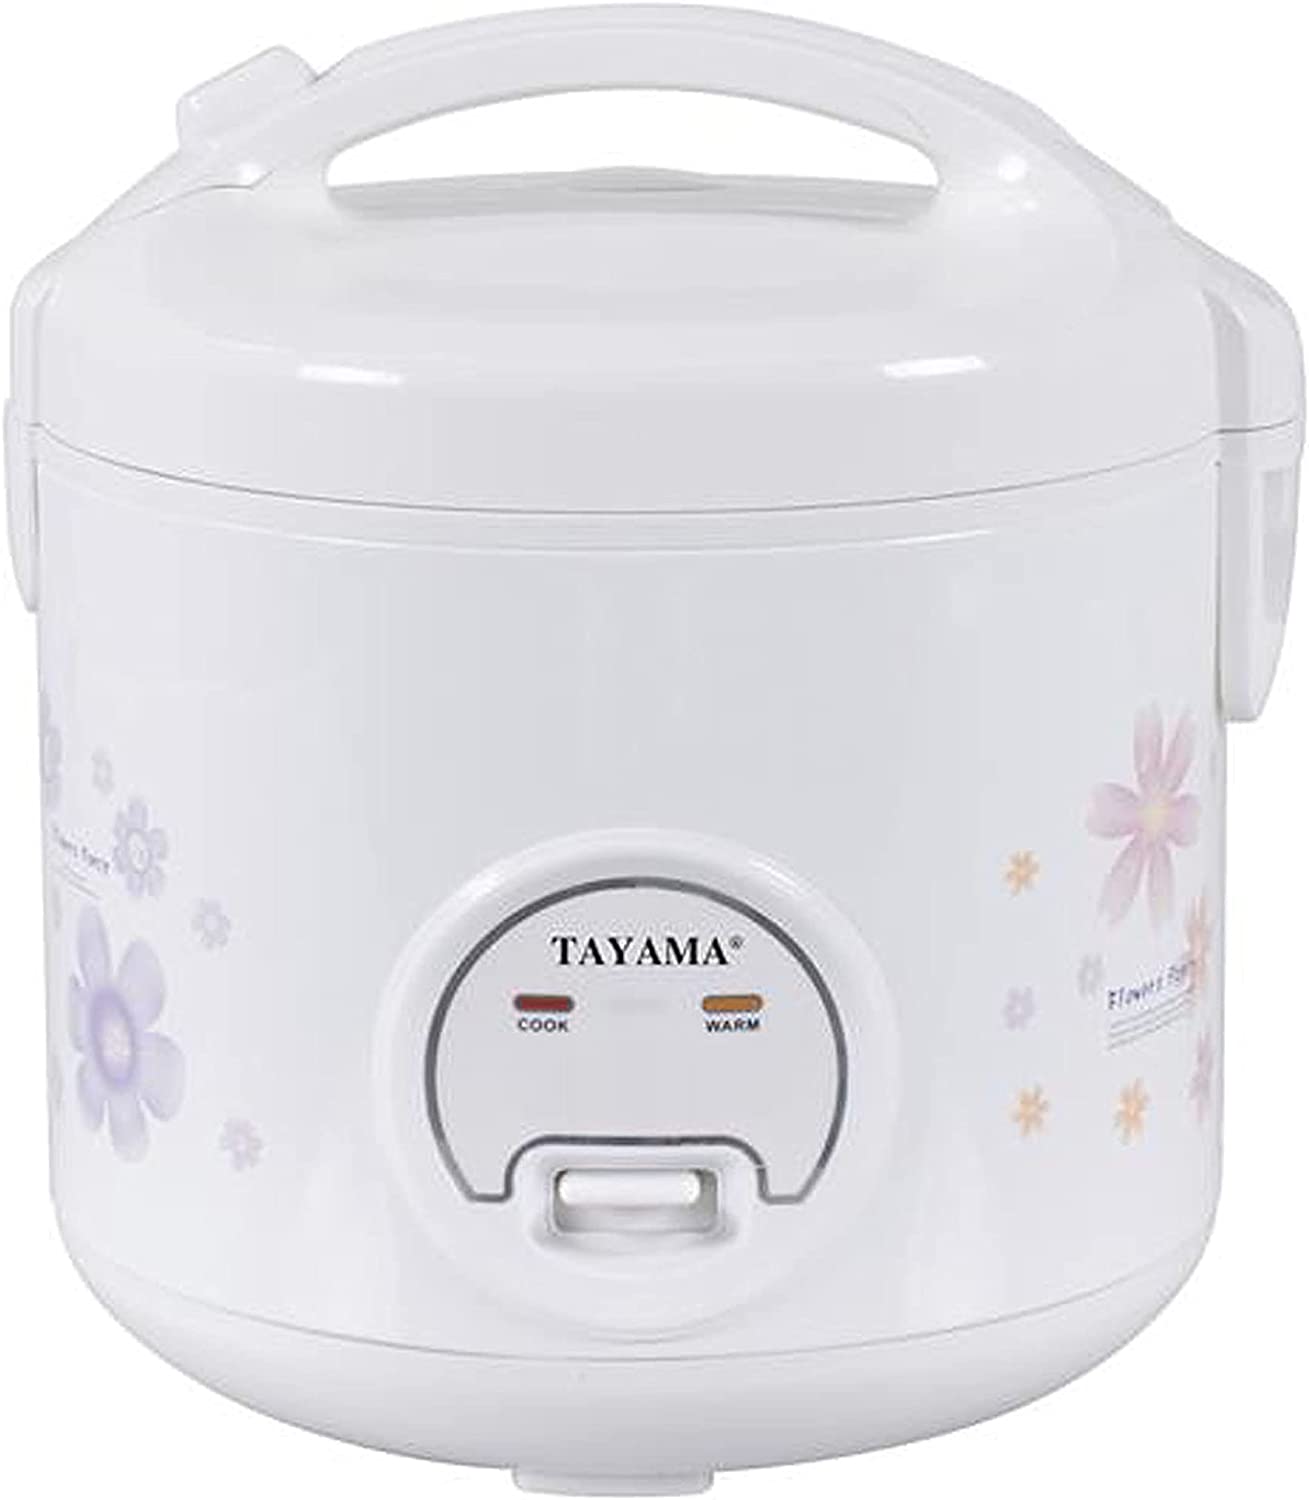 Tayama Automatic Rice Cooker &amp; Food Steamer, 8 Cup